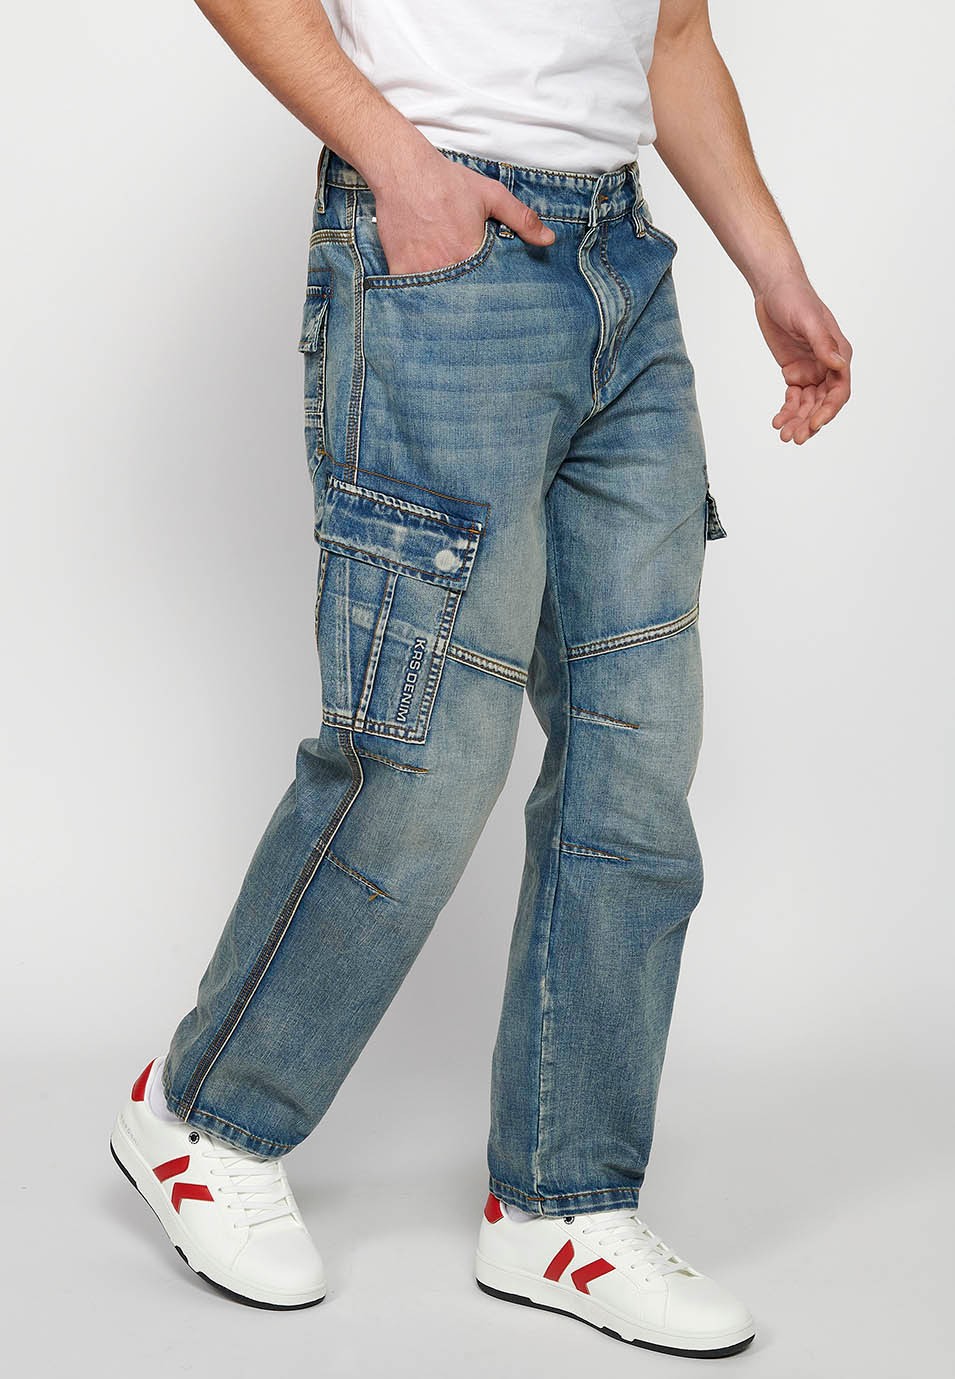 Long Cargo Pants with Front Zipper and Button Closure with Side Pockets with Flap in Blue for Men 1